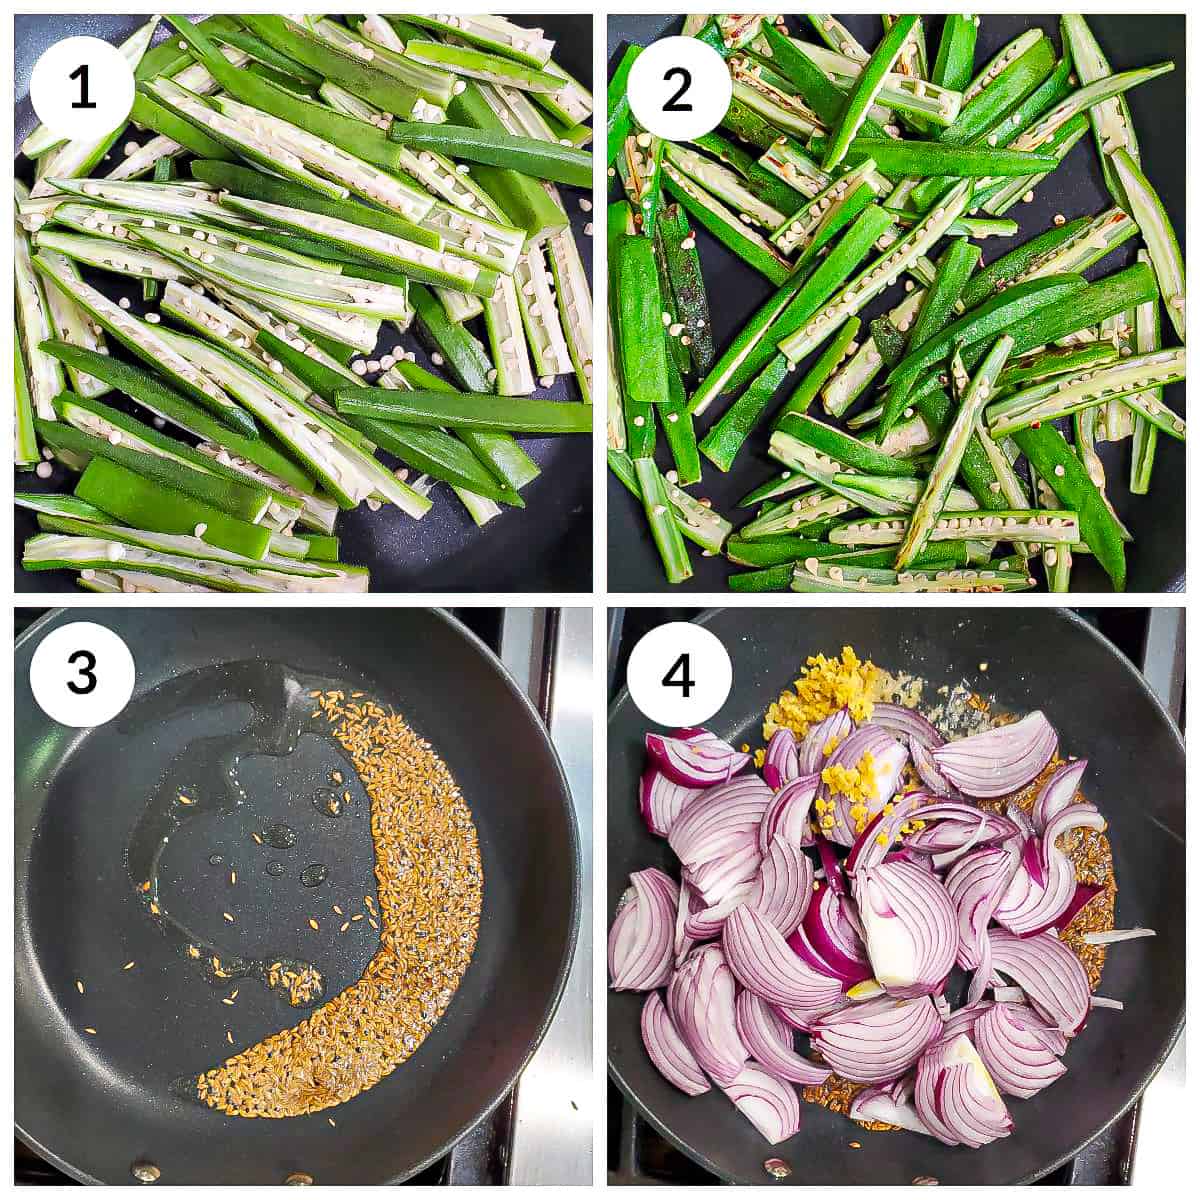 Steps for roasting bhindi and then adding onions and ginger